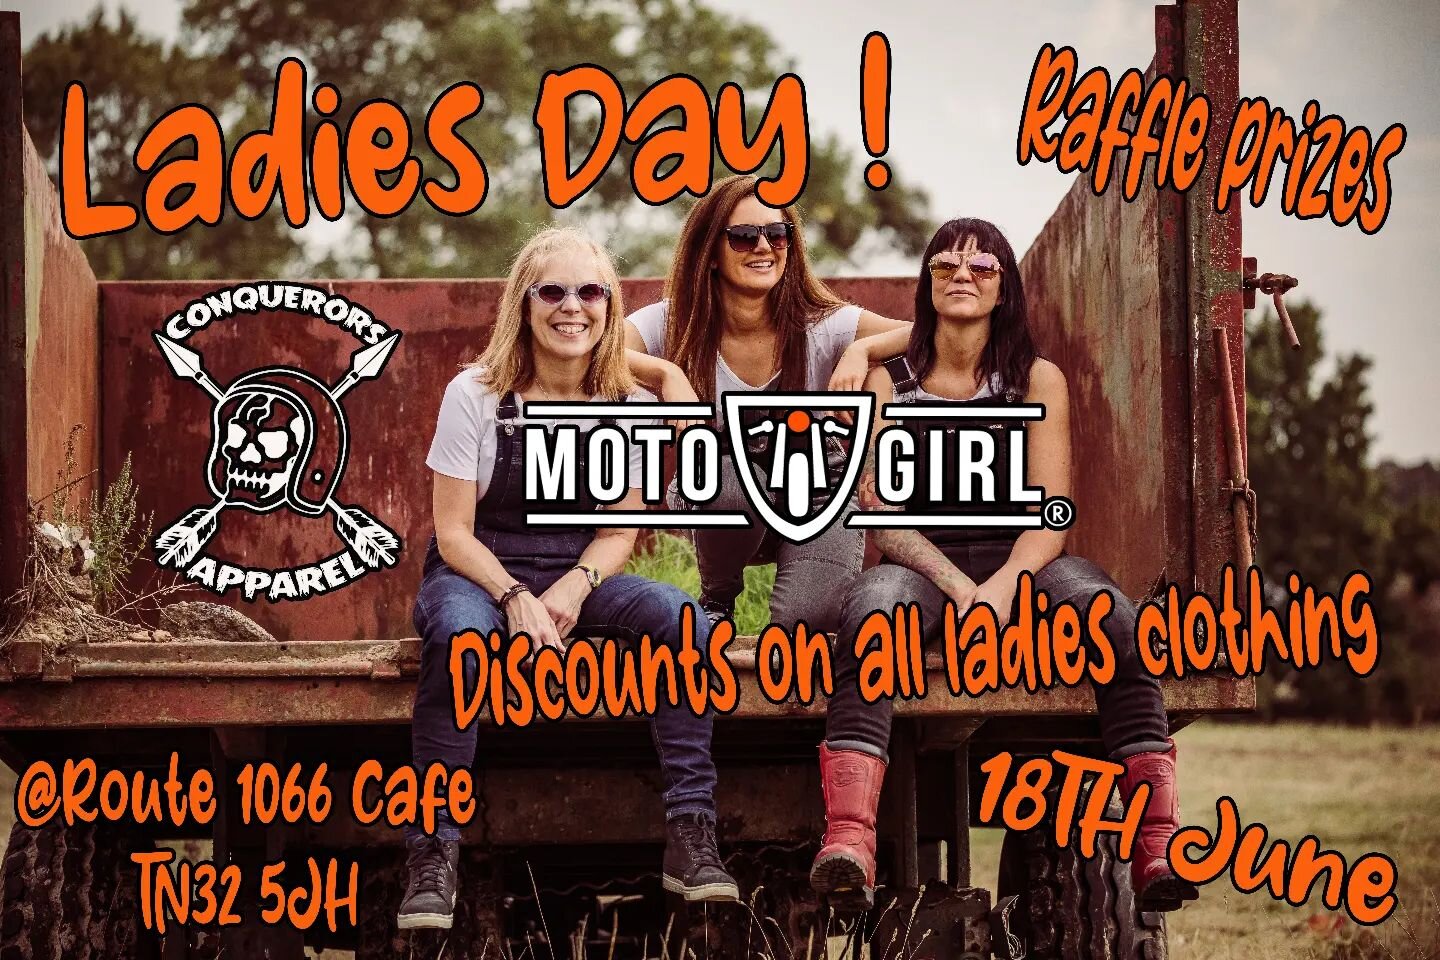 We have teaming up with @motogirluk to bring you our first ladies day! 

With deals and discounts and an amazing raffle, and free tea coffee, this is one not to be missed !! 

#ladiesday #femalebikers #femalebikeriderscommunity  #motogirl #conquerors